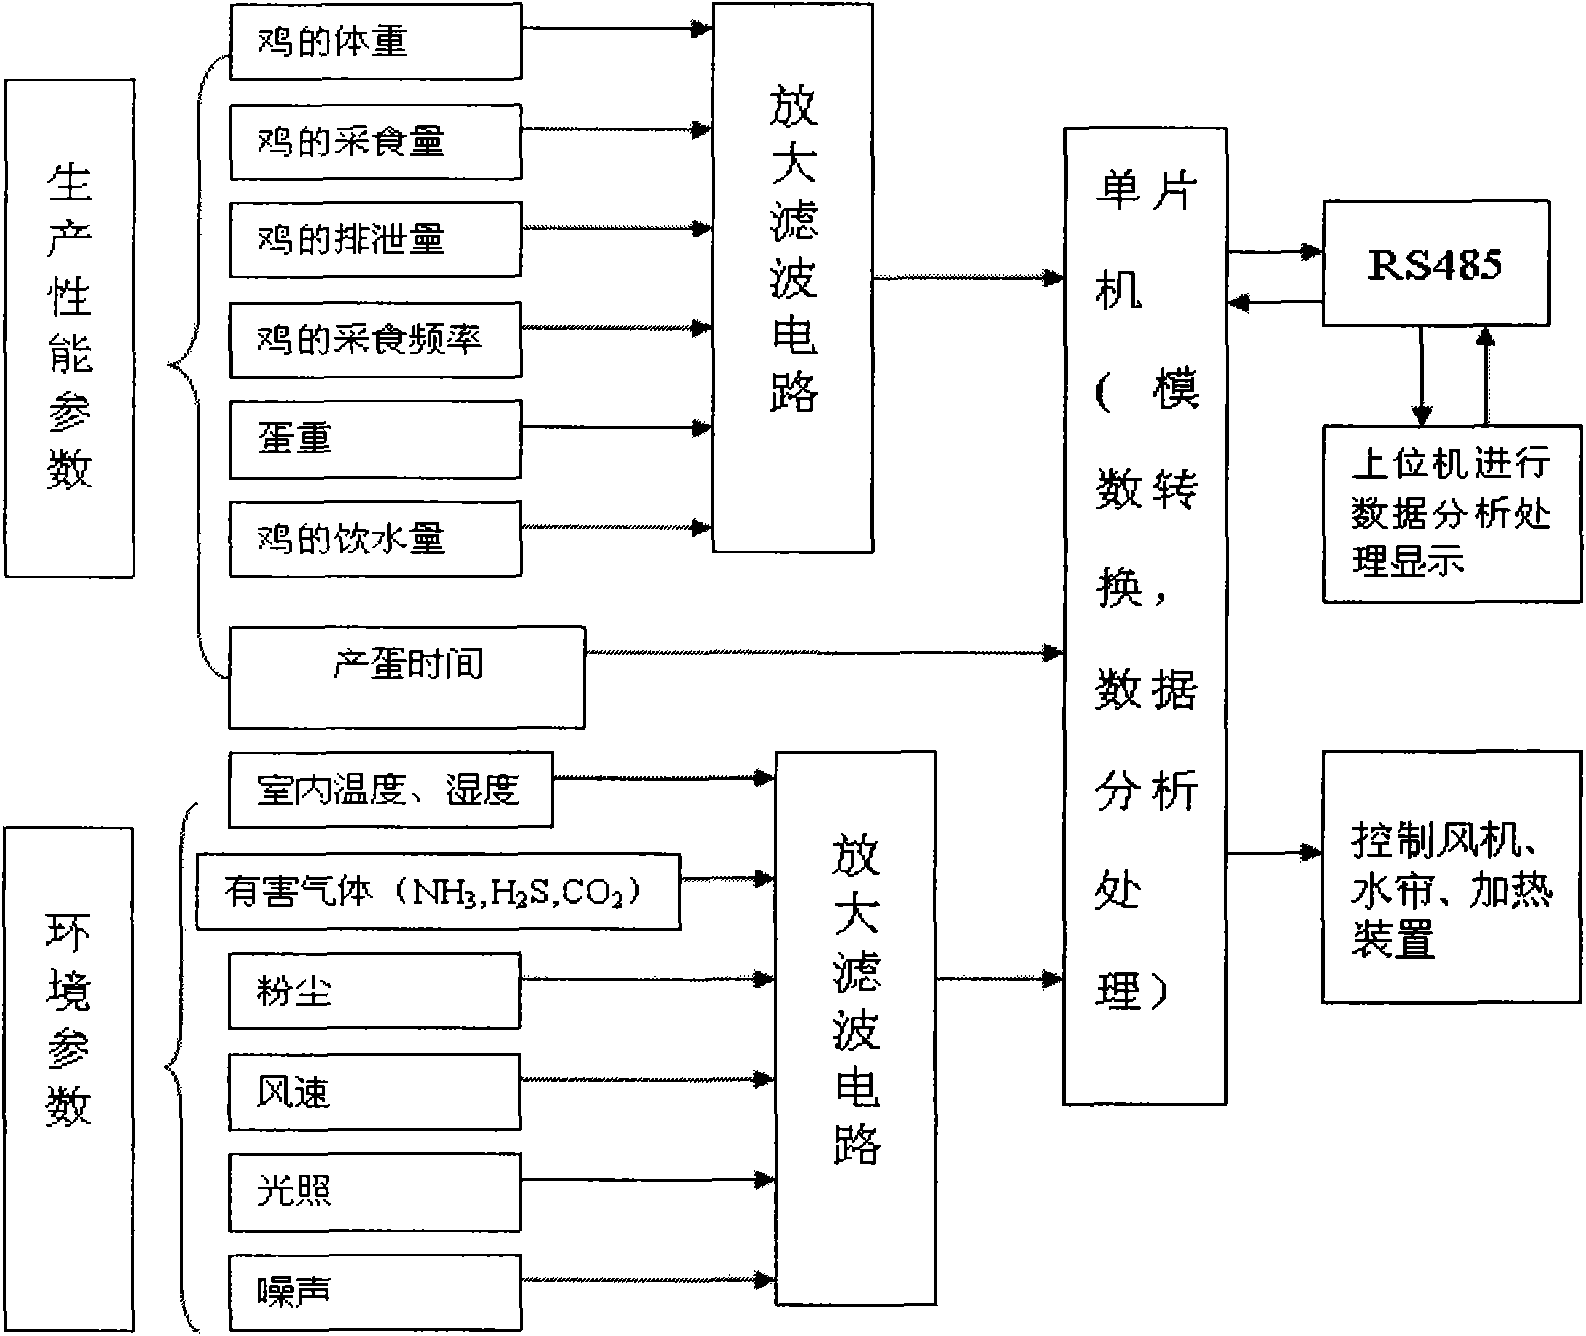 System for individually recording production performance of layers and automatically monitoring environment of layer house